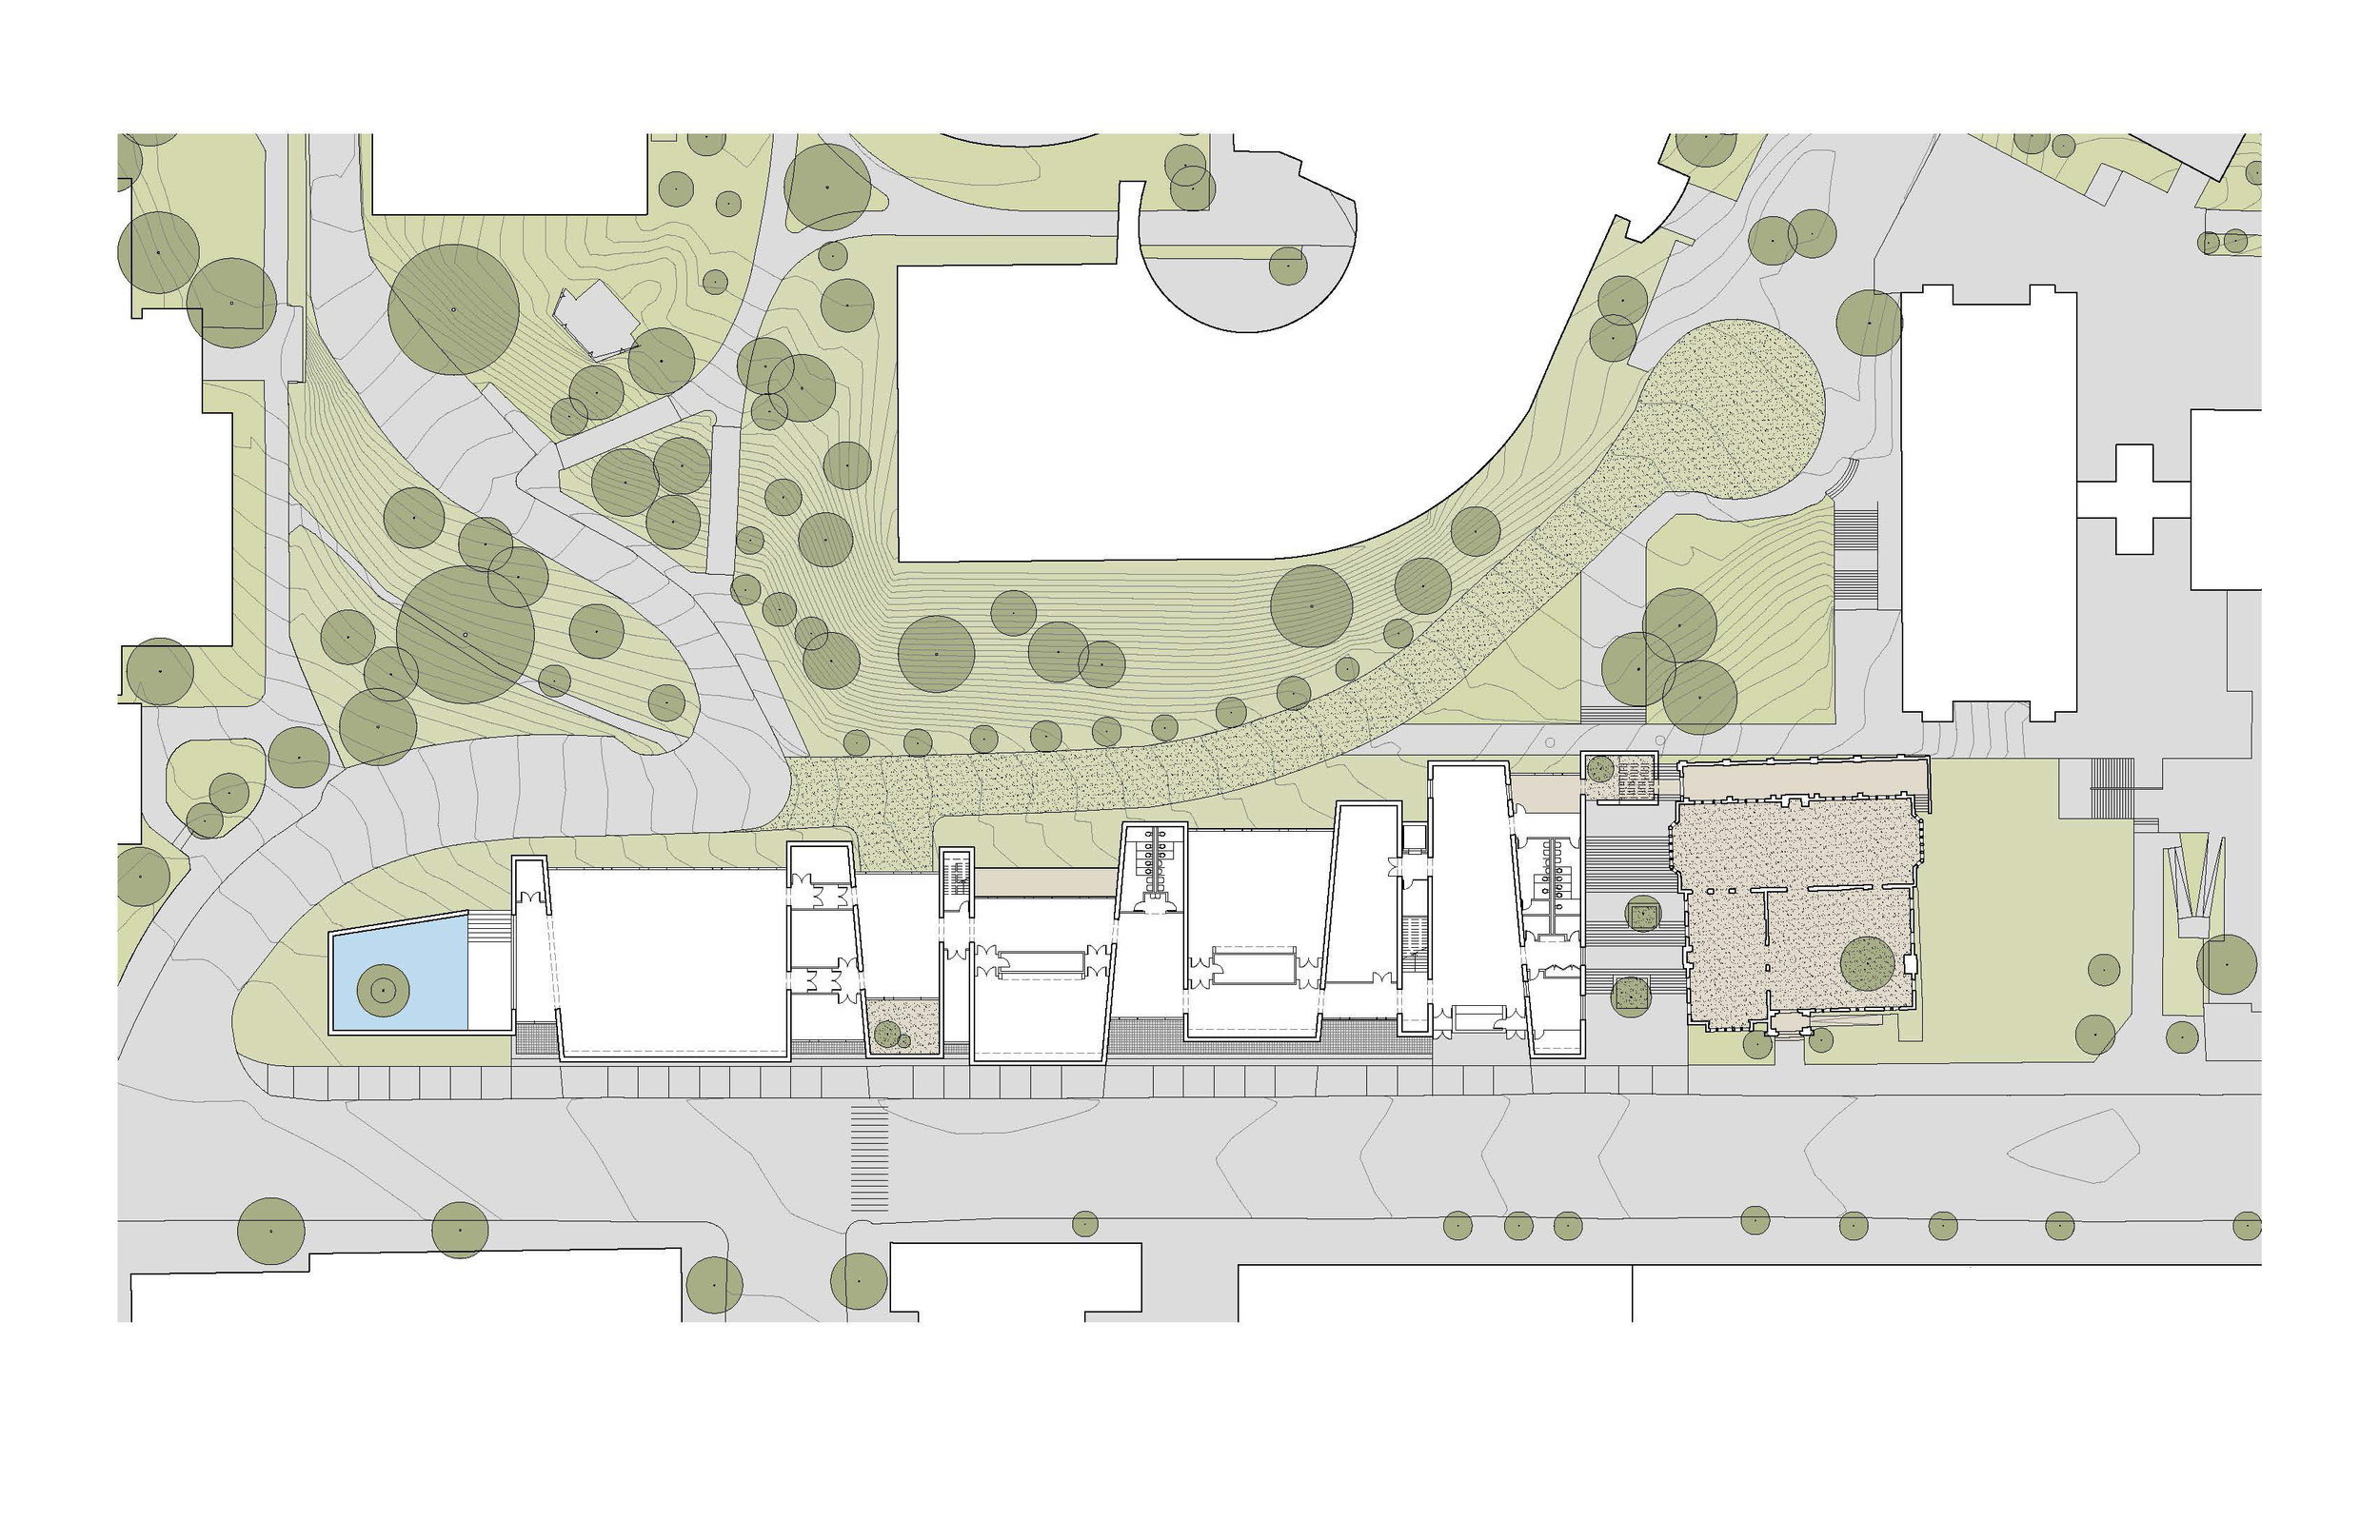 17_08.16 - site plan colored (not to scale).jpg